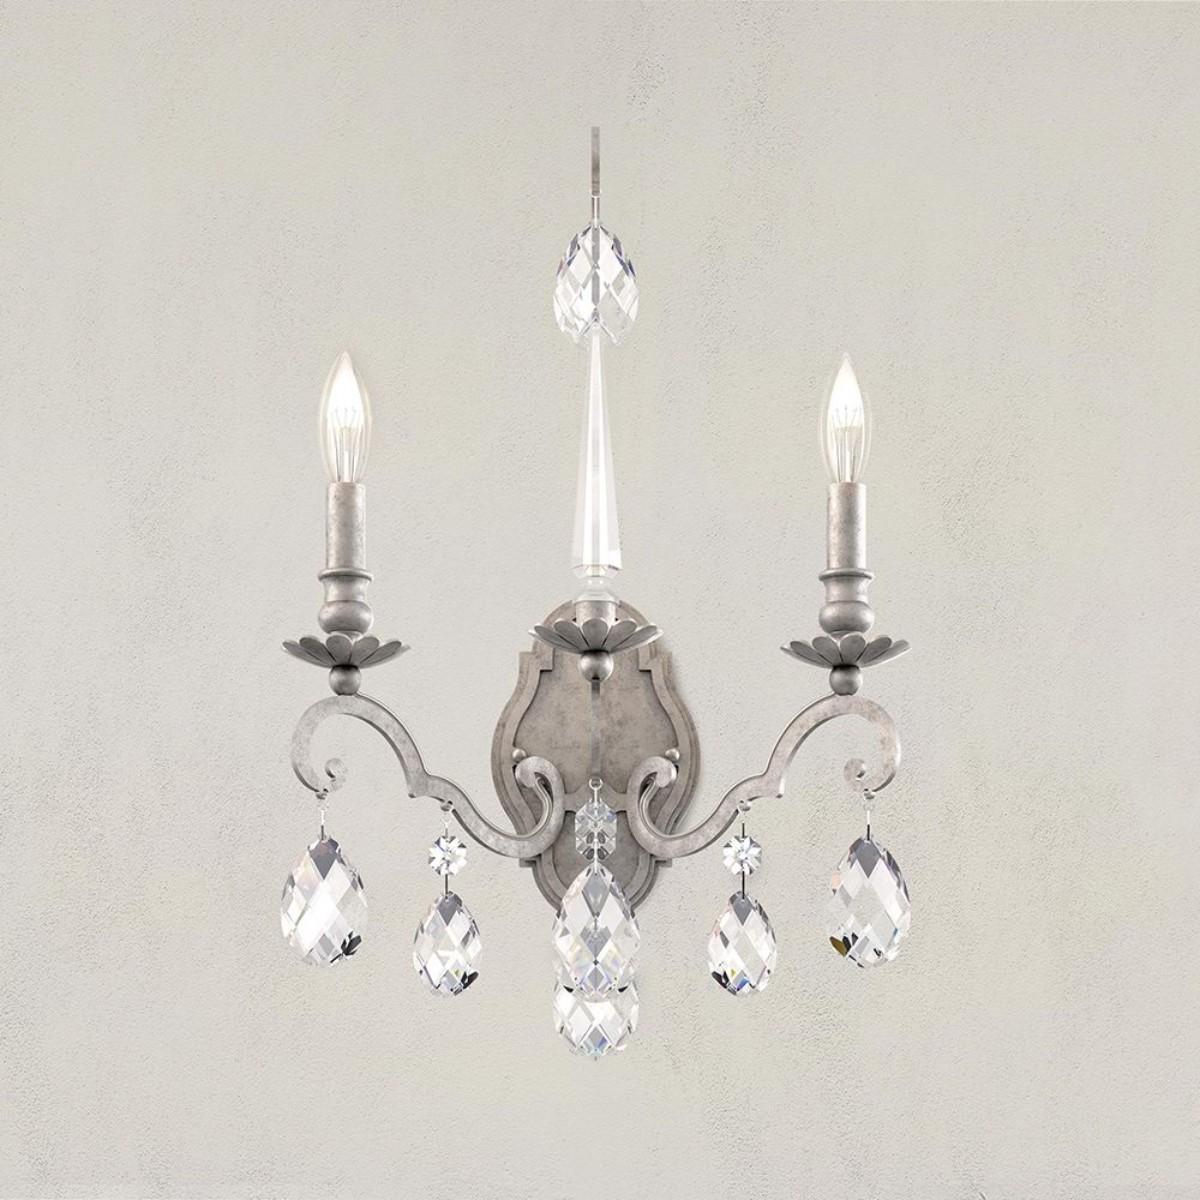 Renaissance Nouveau 21 inch. Armed Sconce with Heritage Crystal